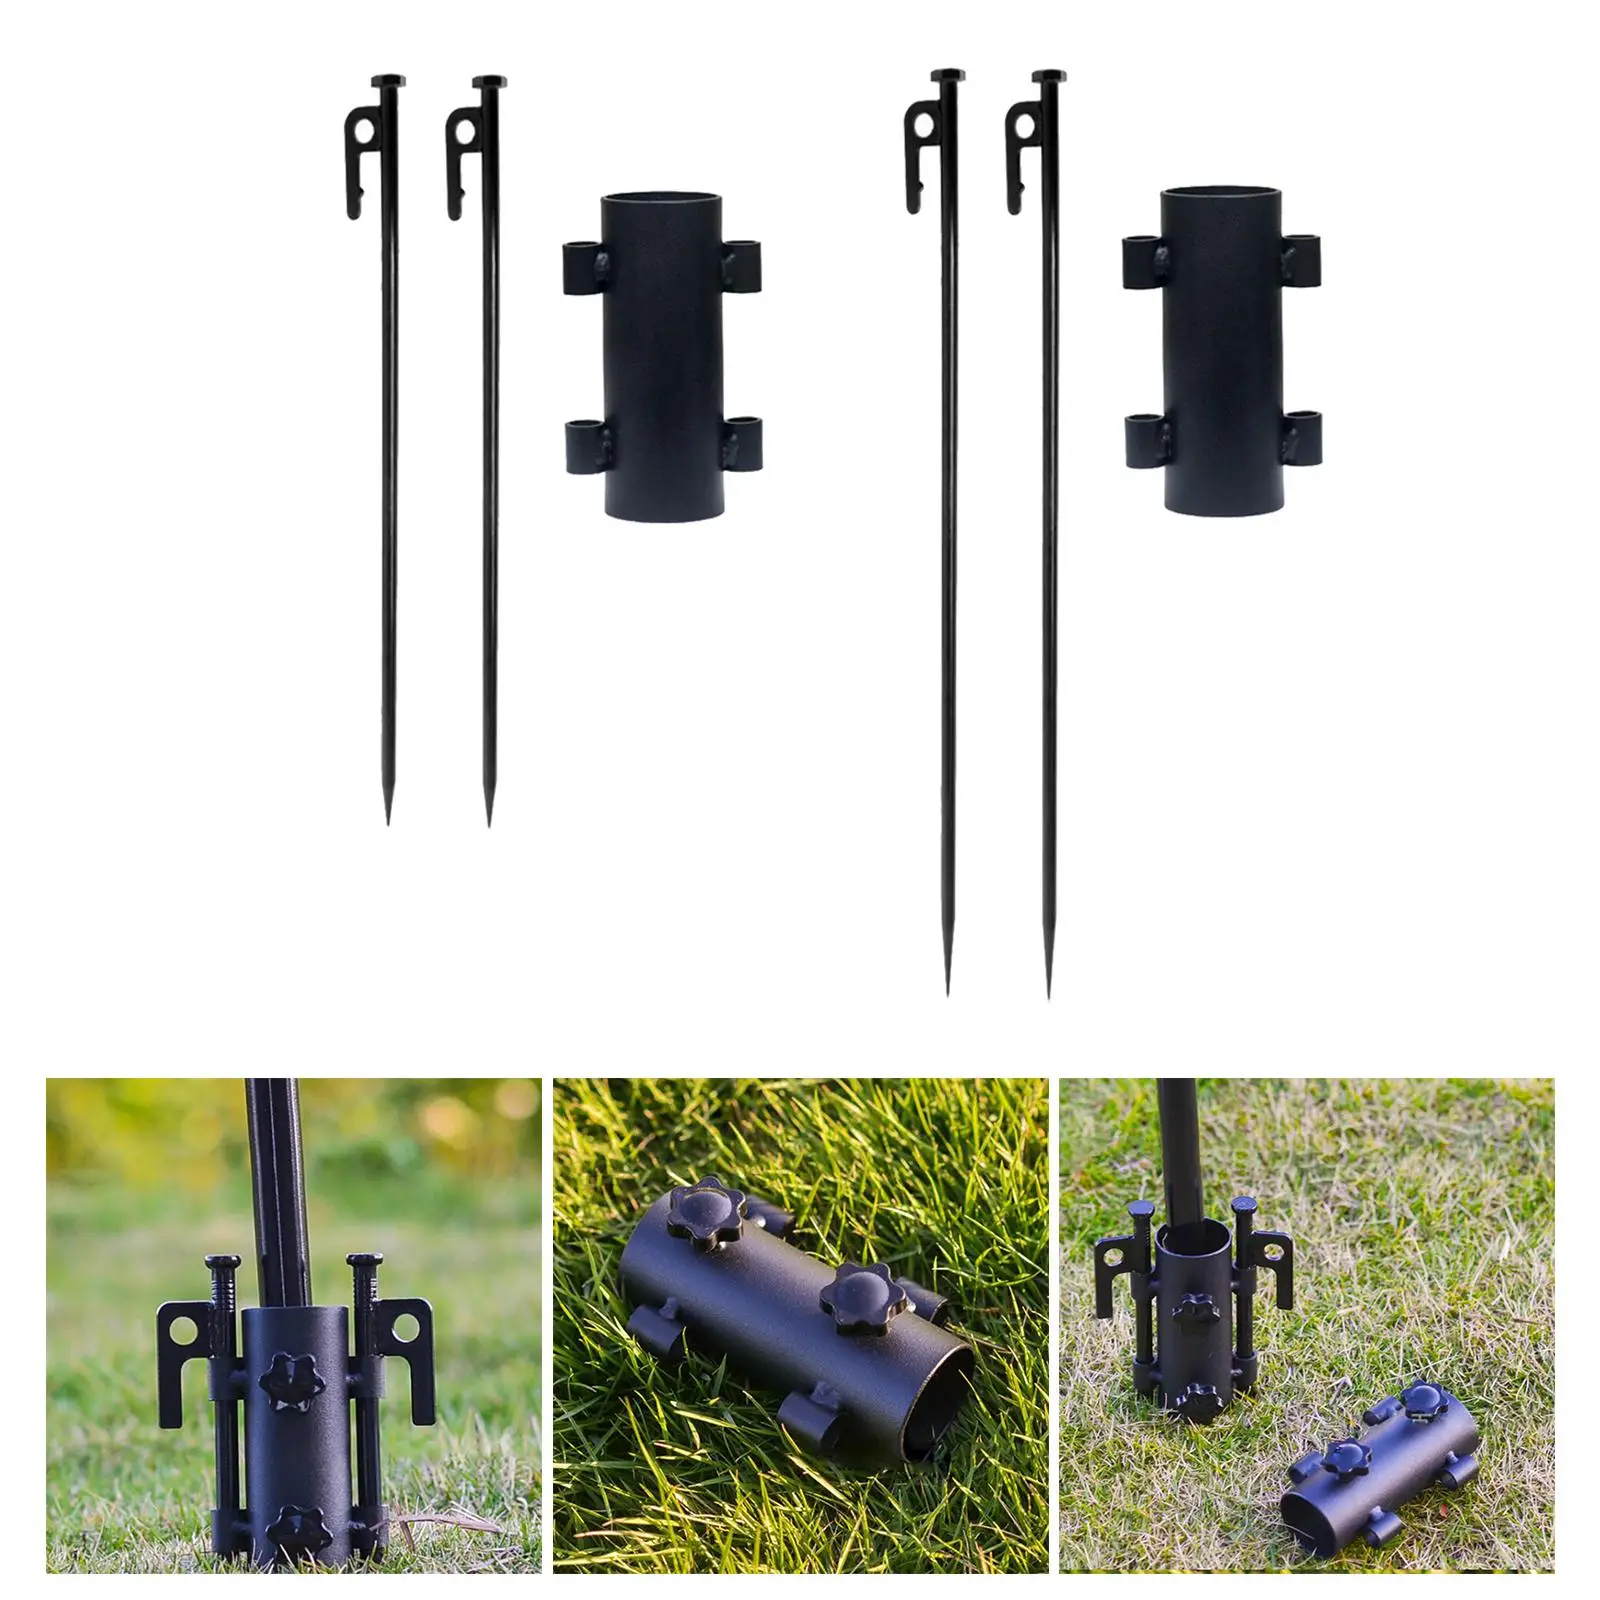 Portable Awning Rod Holder Reinforced Metal Windproof Fixed Tube Canopy Poles